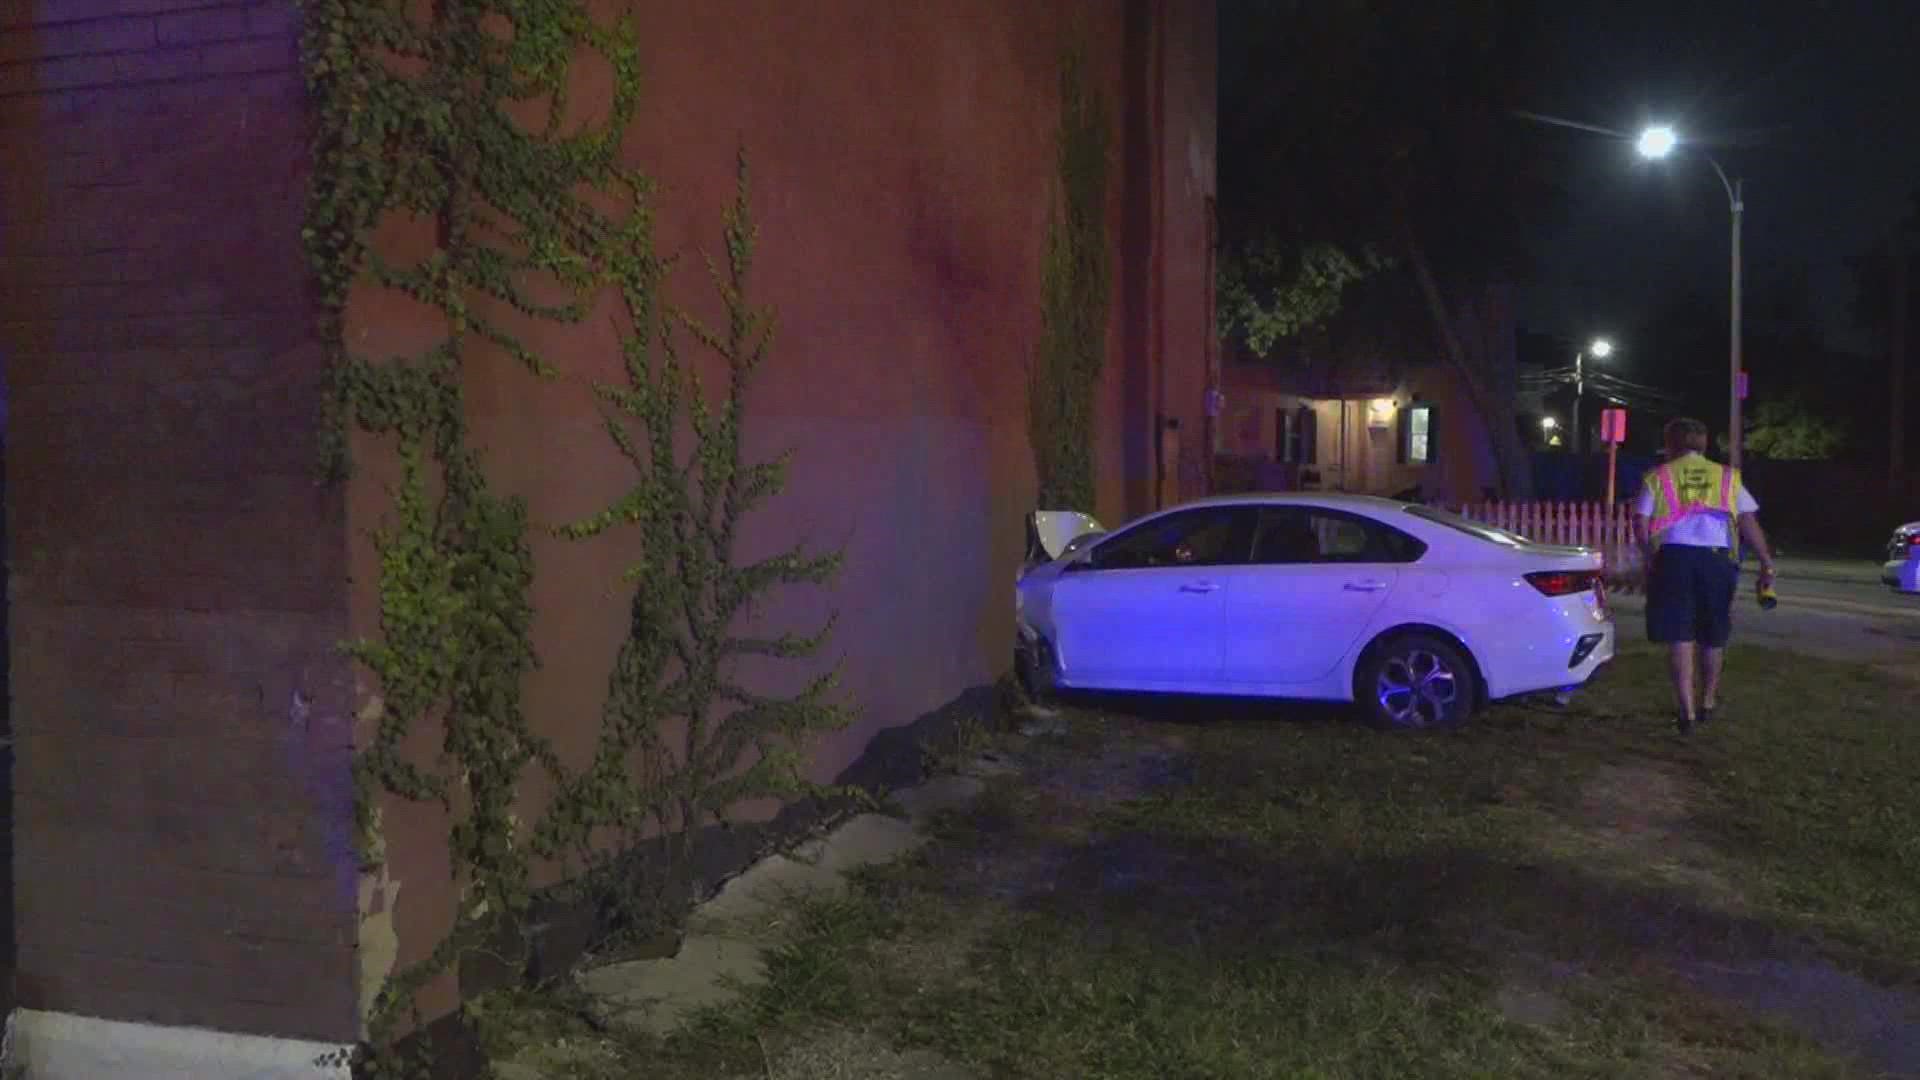 The crash happened just after 12:30 a.m. Monday on Gravois and Nebraska. It appears the car went through a small yard before slamming through the wall of a building.